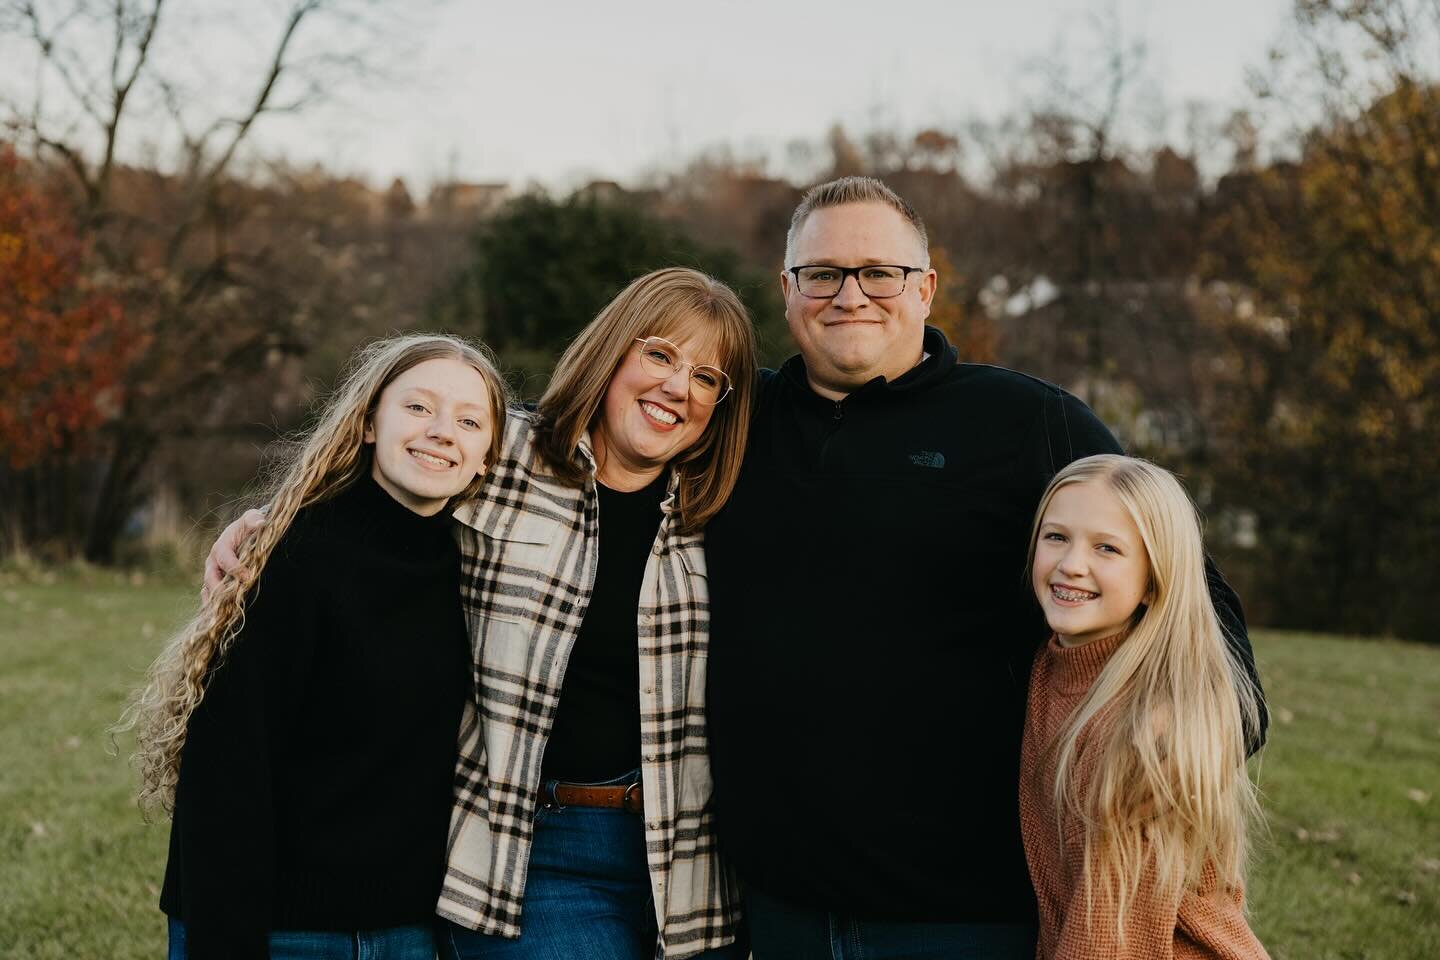 Pulling some sessions out of the archives because they&rsquo;re too good not to share. Meet the Patinski fam! 🍂 Had fun seeing these friends again for a short fall mini session. Capturing memories year after year and seeing families grow is so dang 